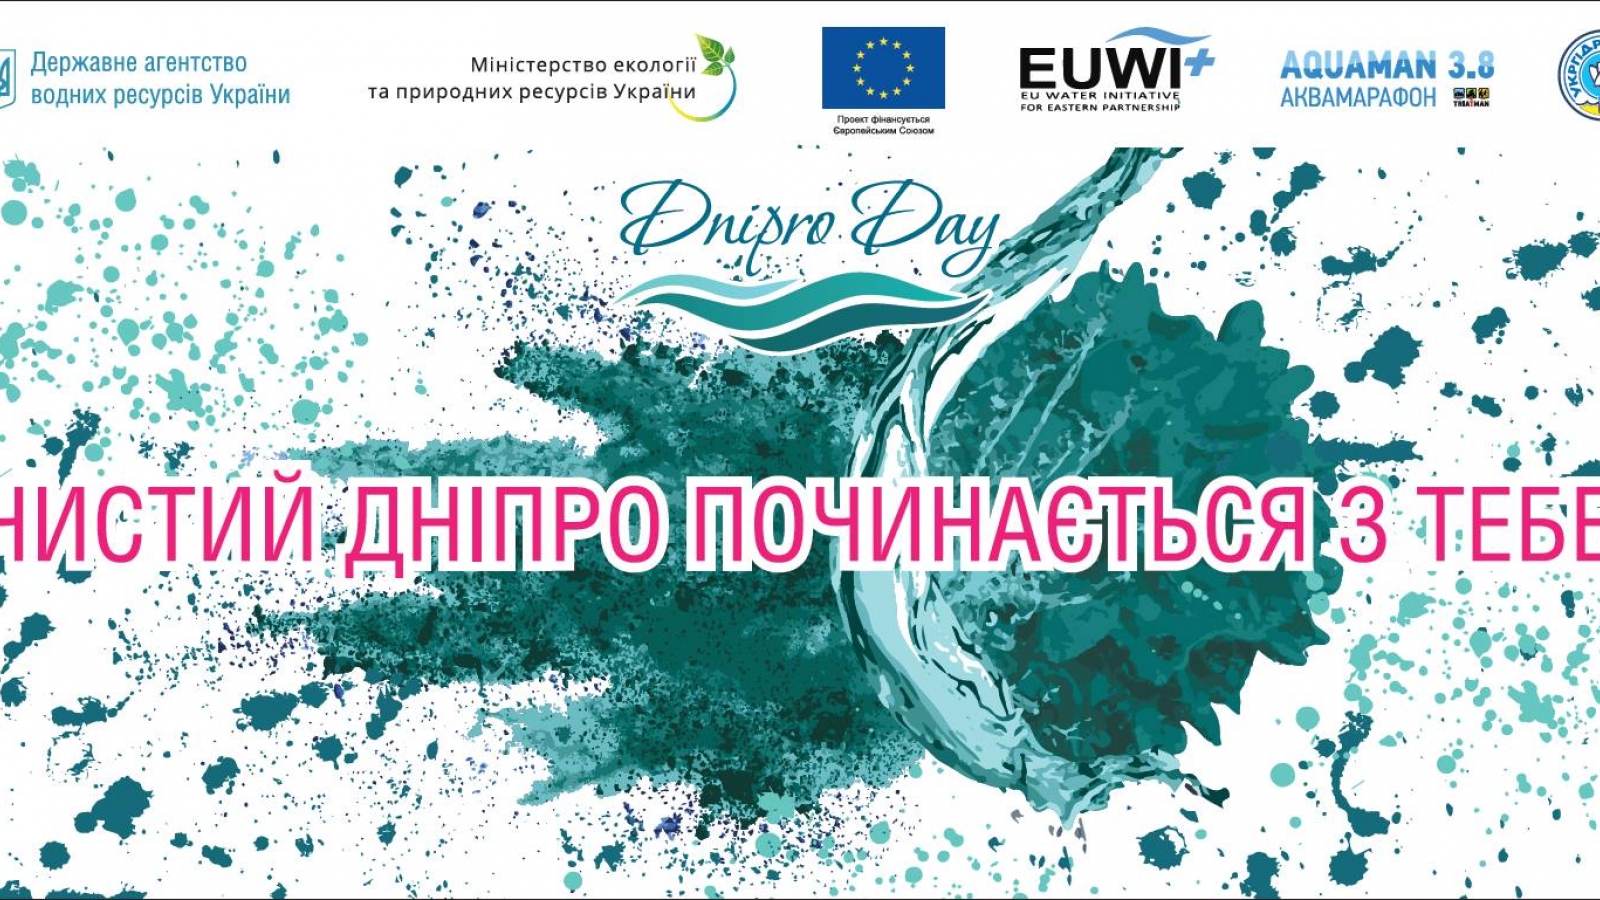 Ukraine: EU-supported campaign to raise awareness of phosphate pollution of Dnieper River comes to an end